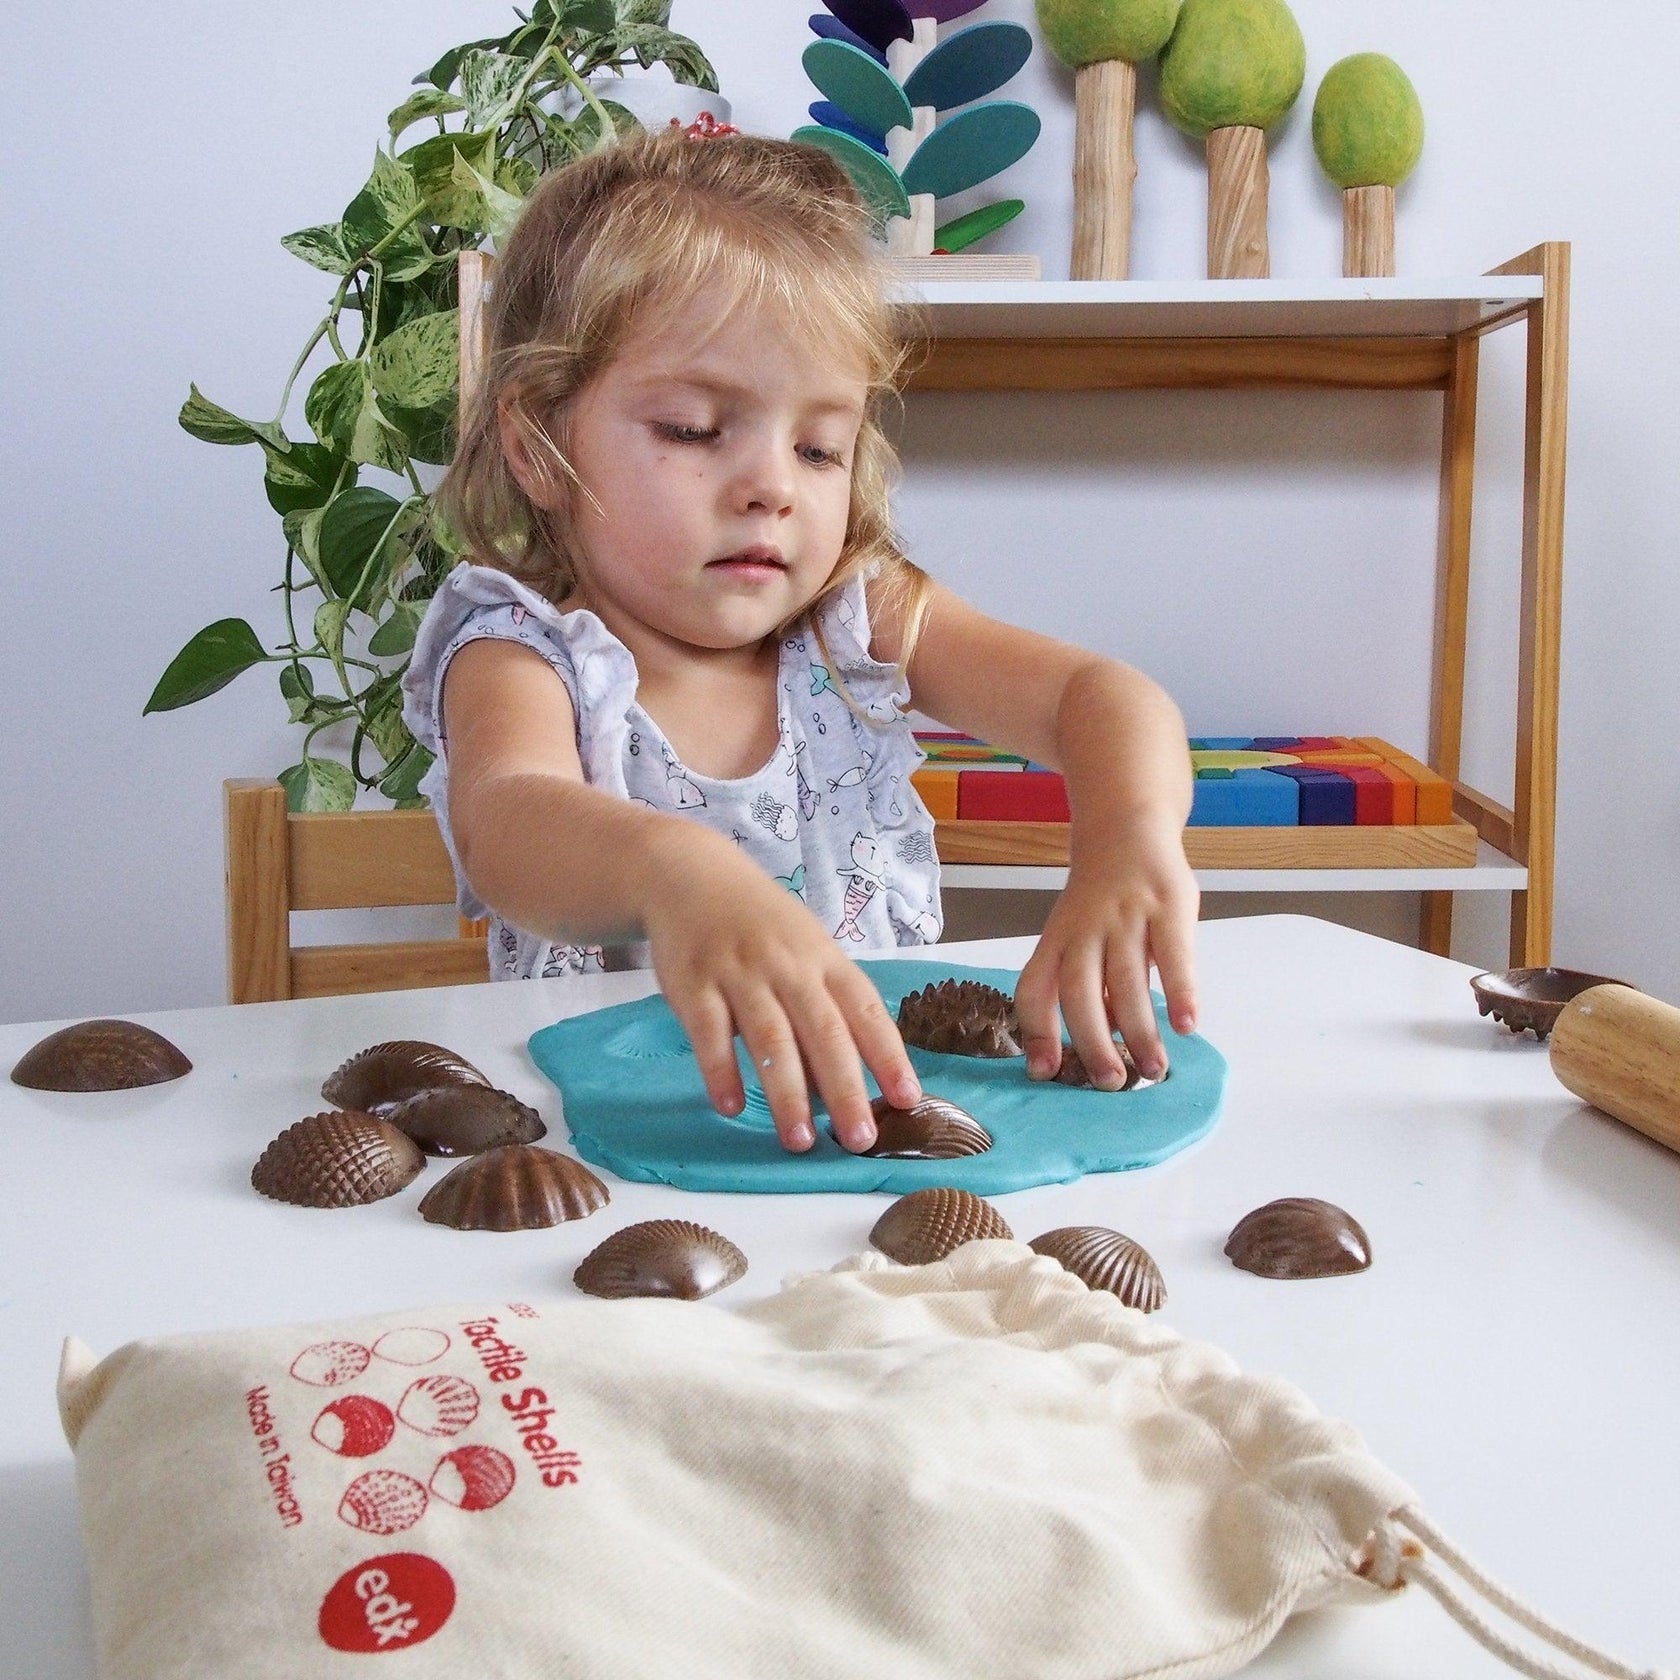 Eco Friendly Tactile Shells Pack 36, These specially designed Eco Friendly Tactile Shells Pack 36 have different tactile surfaces and come in 3 sizes. The Eco Friendly Tactile Shells Pack 36 are made from natural Fibre Particulate Composite (FPC), an agricultural waste product from rice stems and rice husks. Children will love to touch and feel these Eco Friendly Tactile Shells Pack 36, describing the differences and similarities. The Eco Friendly Tactile Shells Pack 36are also ideal to teach early number c